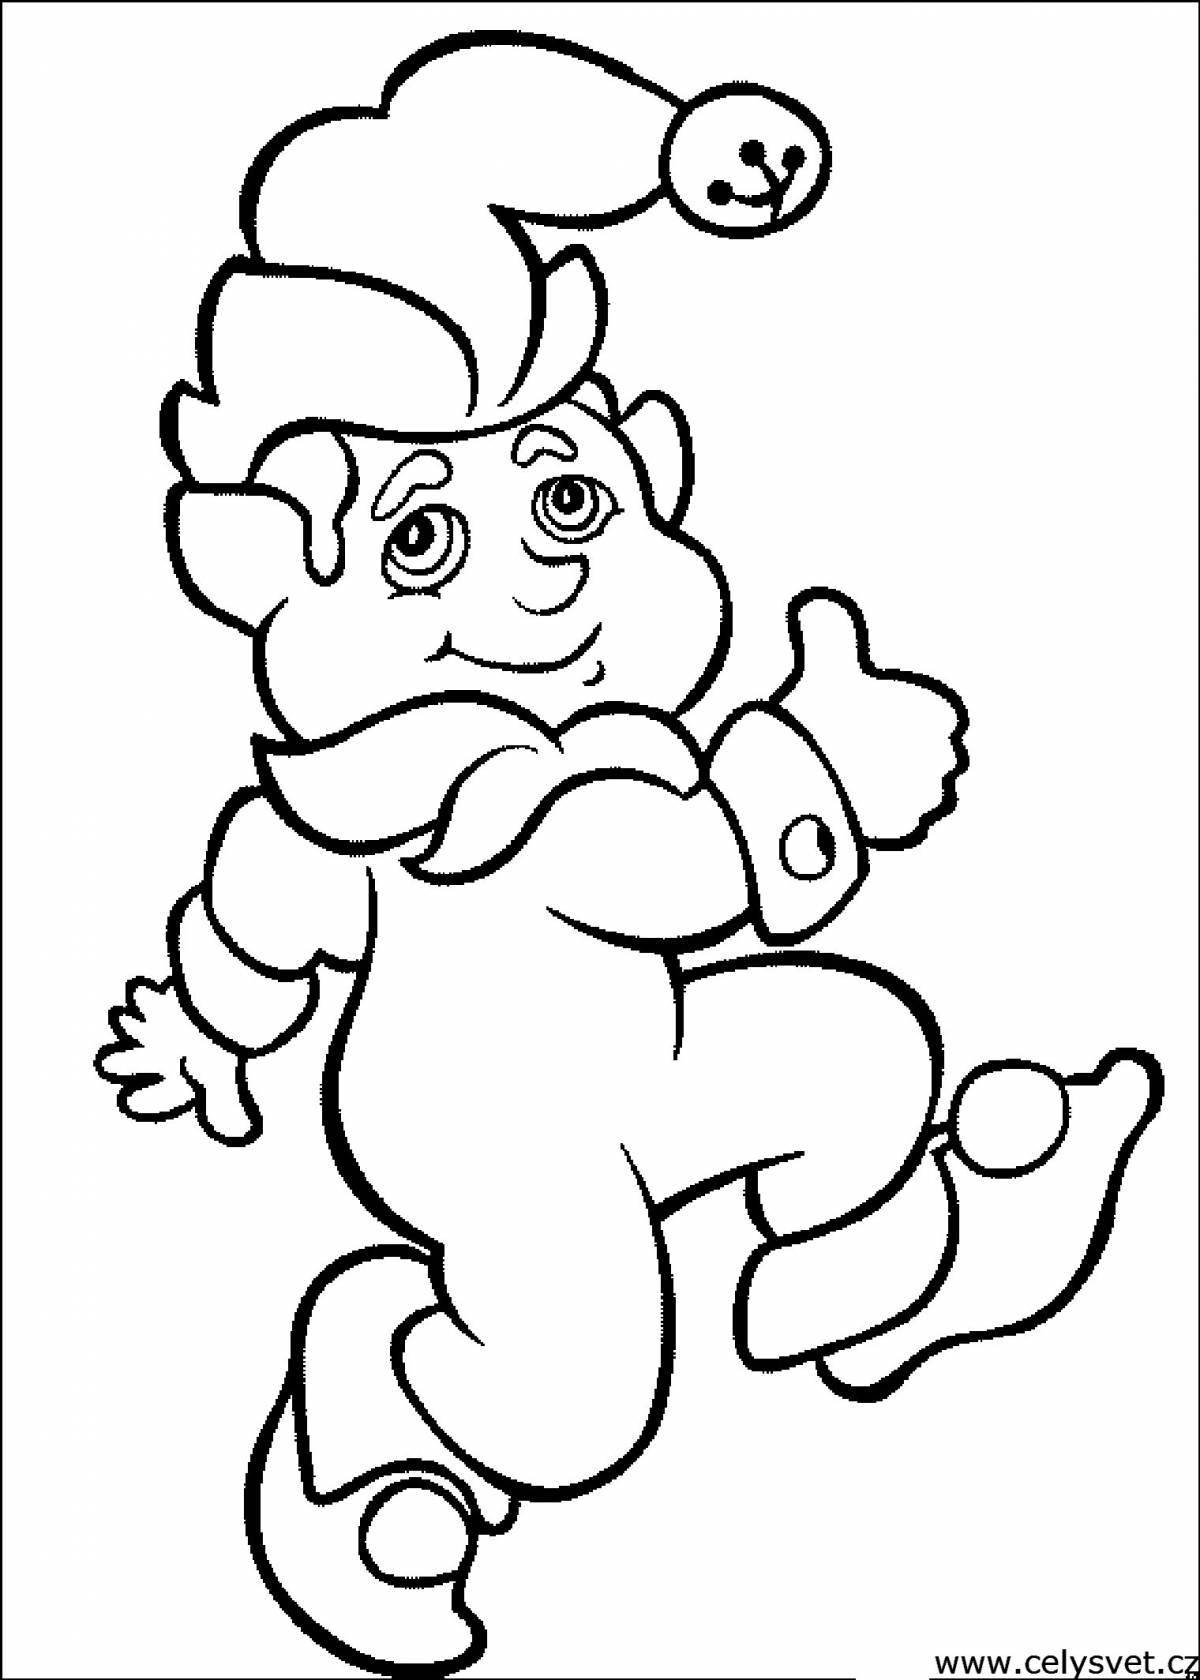 Glamourous dwarf coloring page for the new year